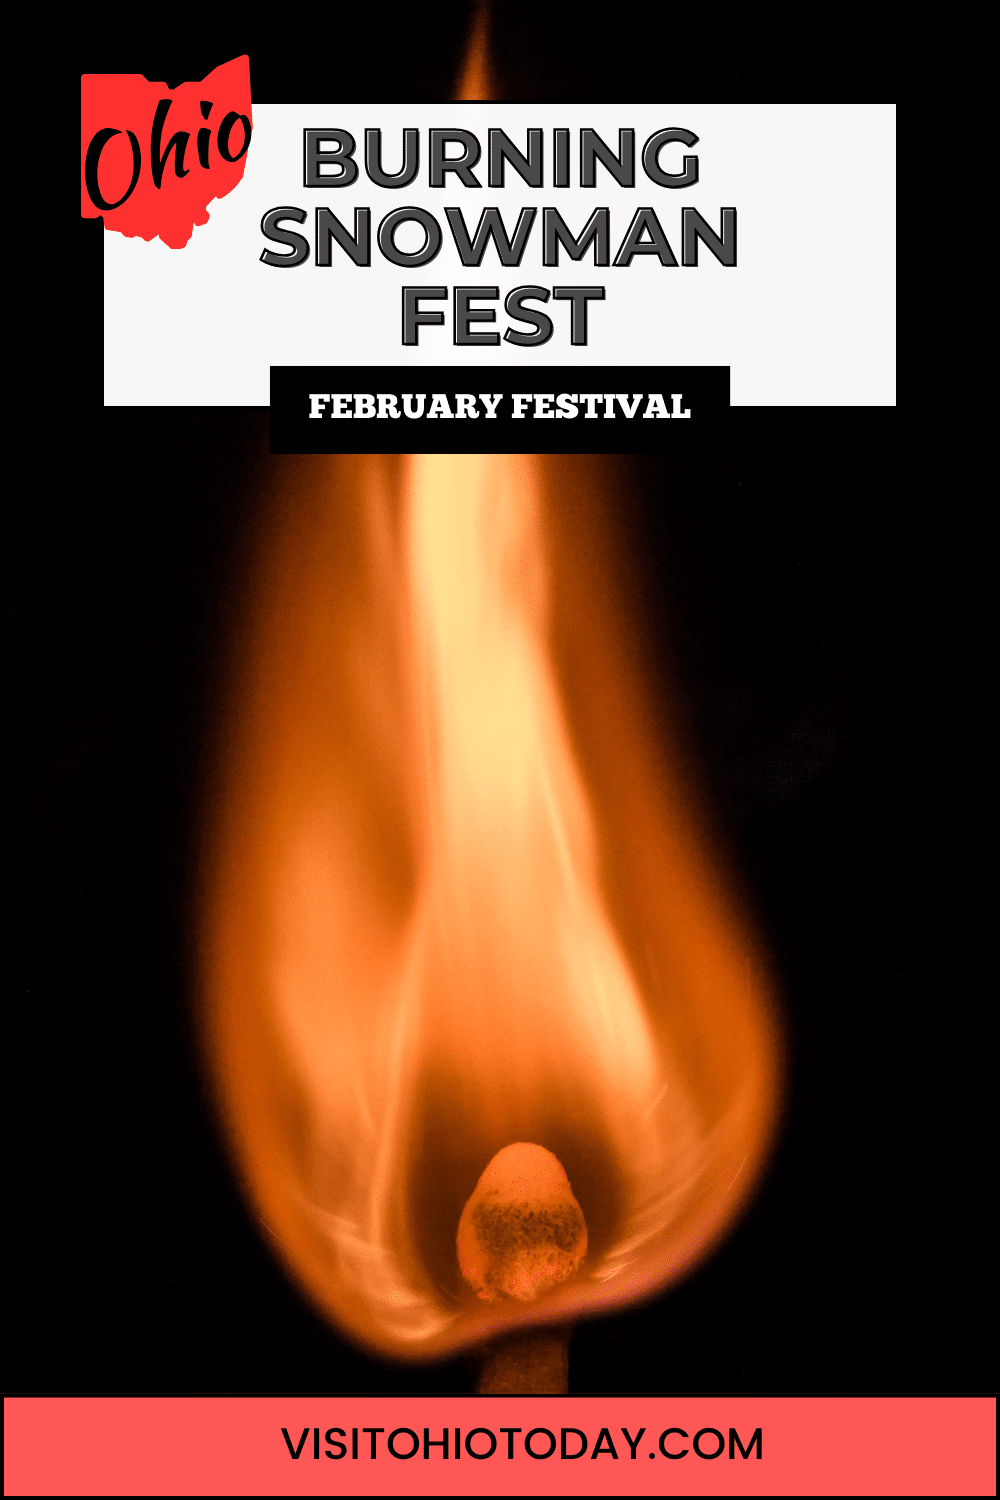 At the annual Burning Snowman Fest, a large snowman is set ablaze to transition to spring. It takes place on Saturday, February 24, 2024.